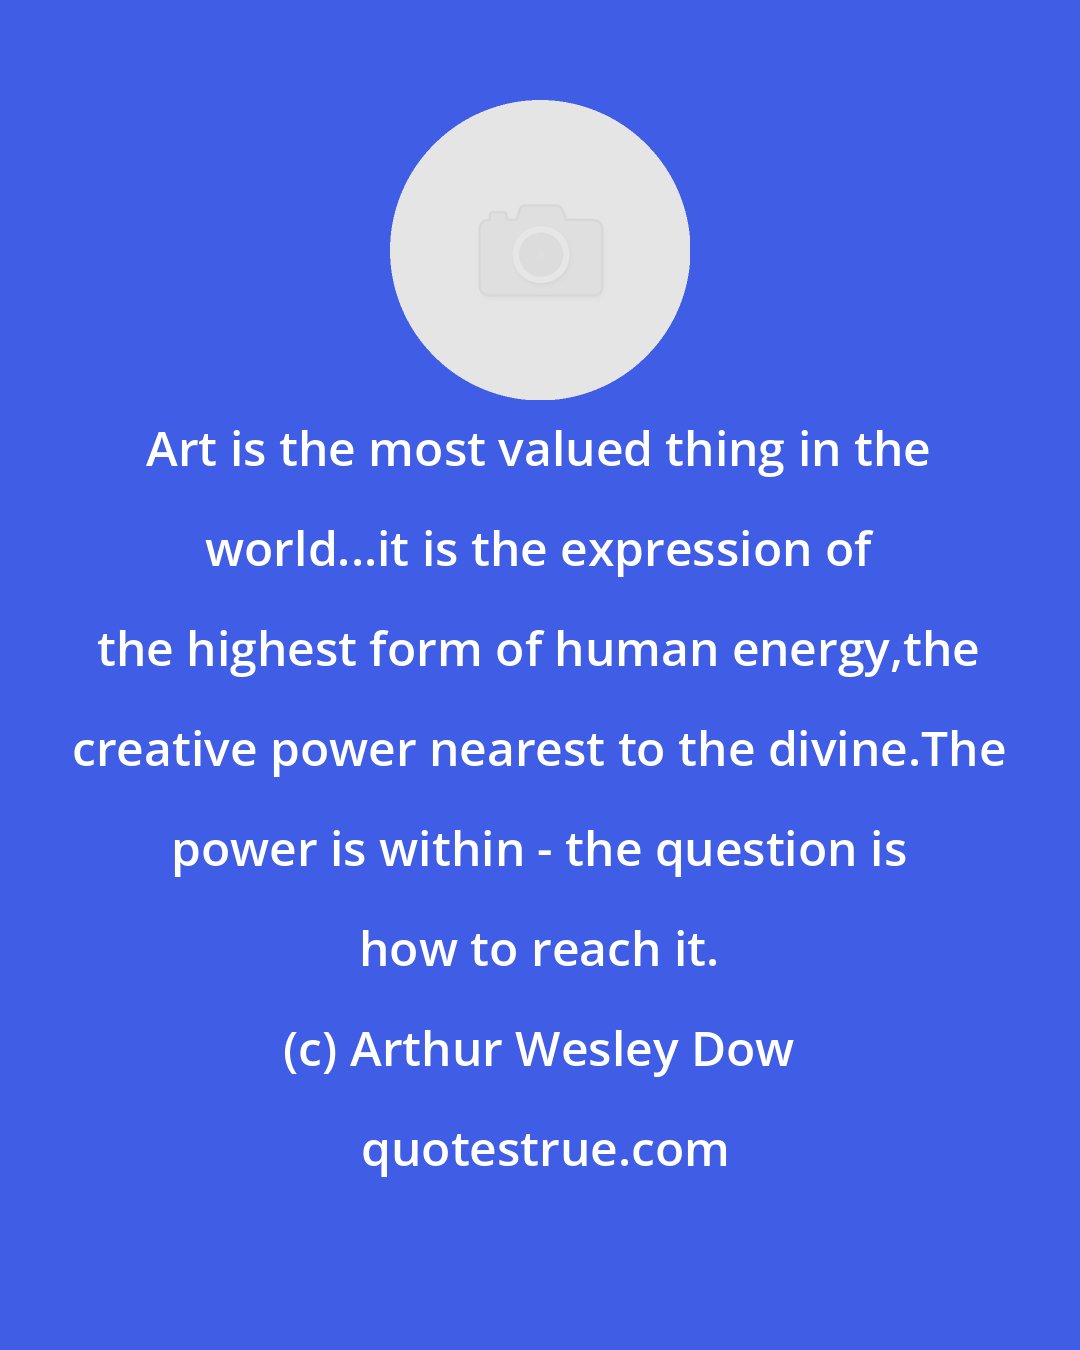 Arthur Wesley Dow: Art is the most valued thing in the world...it is the expression of the highest form of human energy,the creative power nearest to the divine.The power is within - the question is how to reach it.